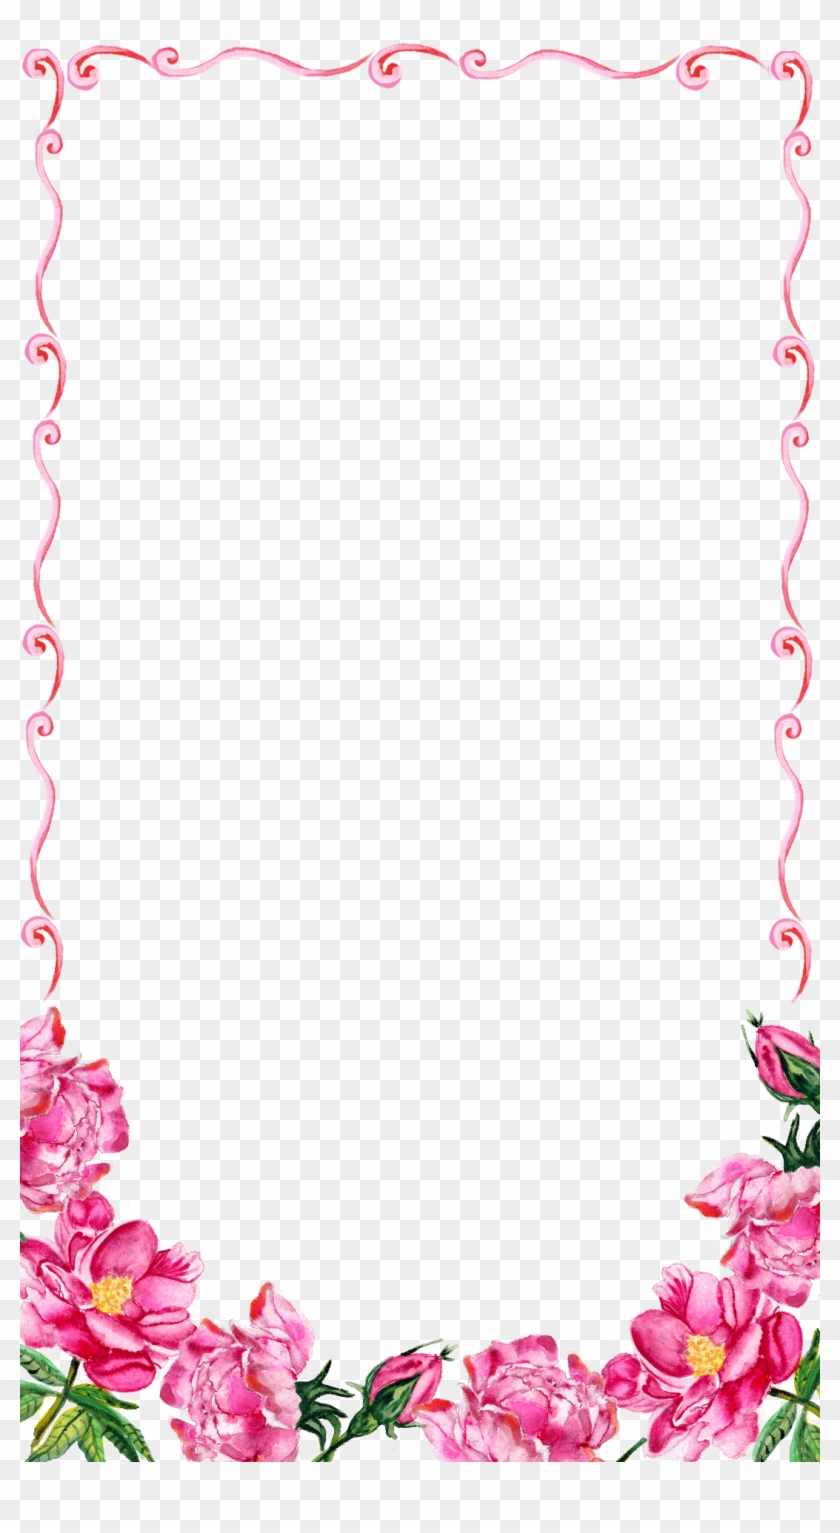 Pink Fl Border Png Transpa Image - Flowers At The Bottom #312042